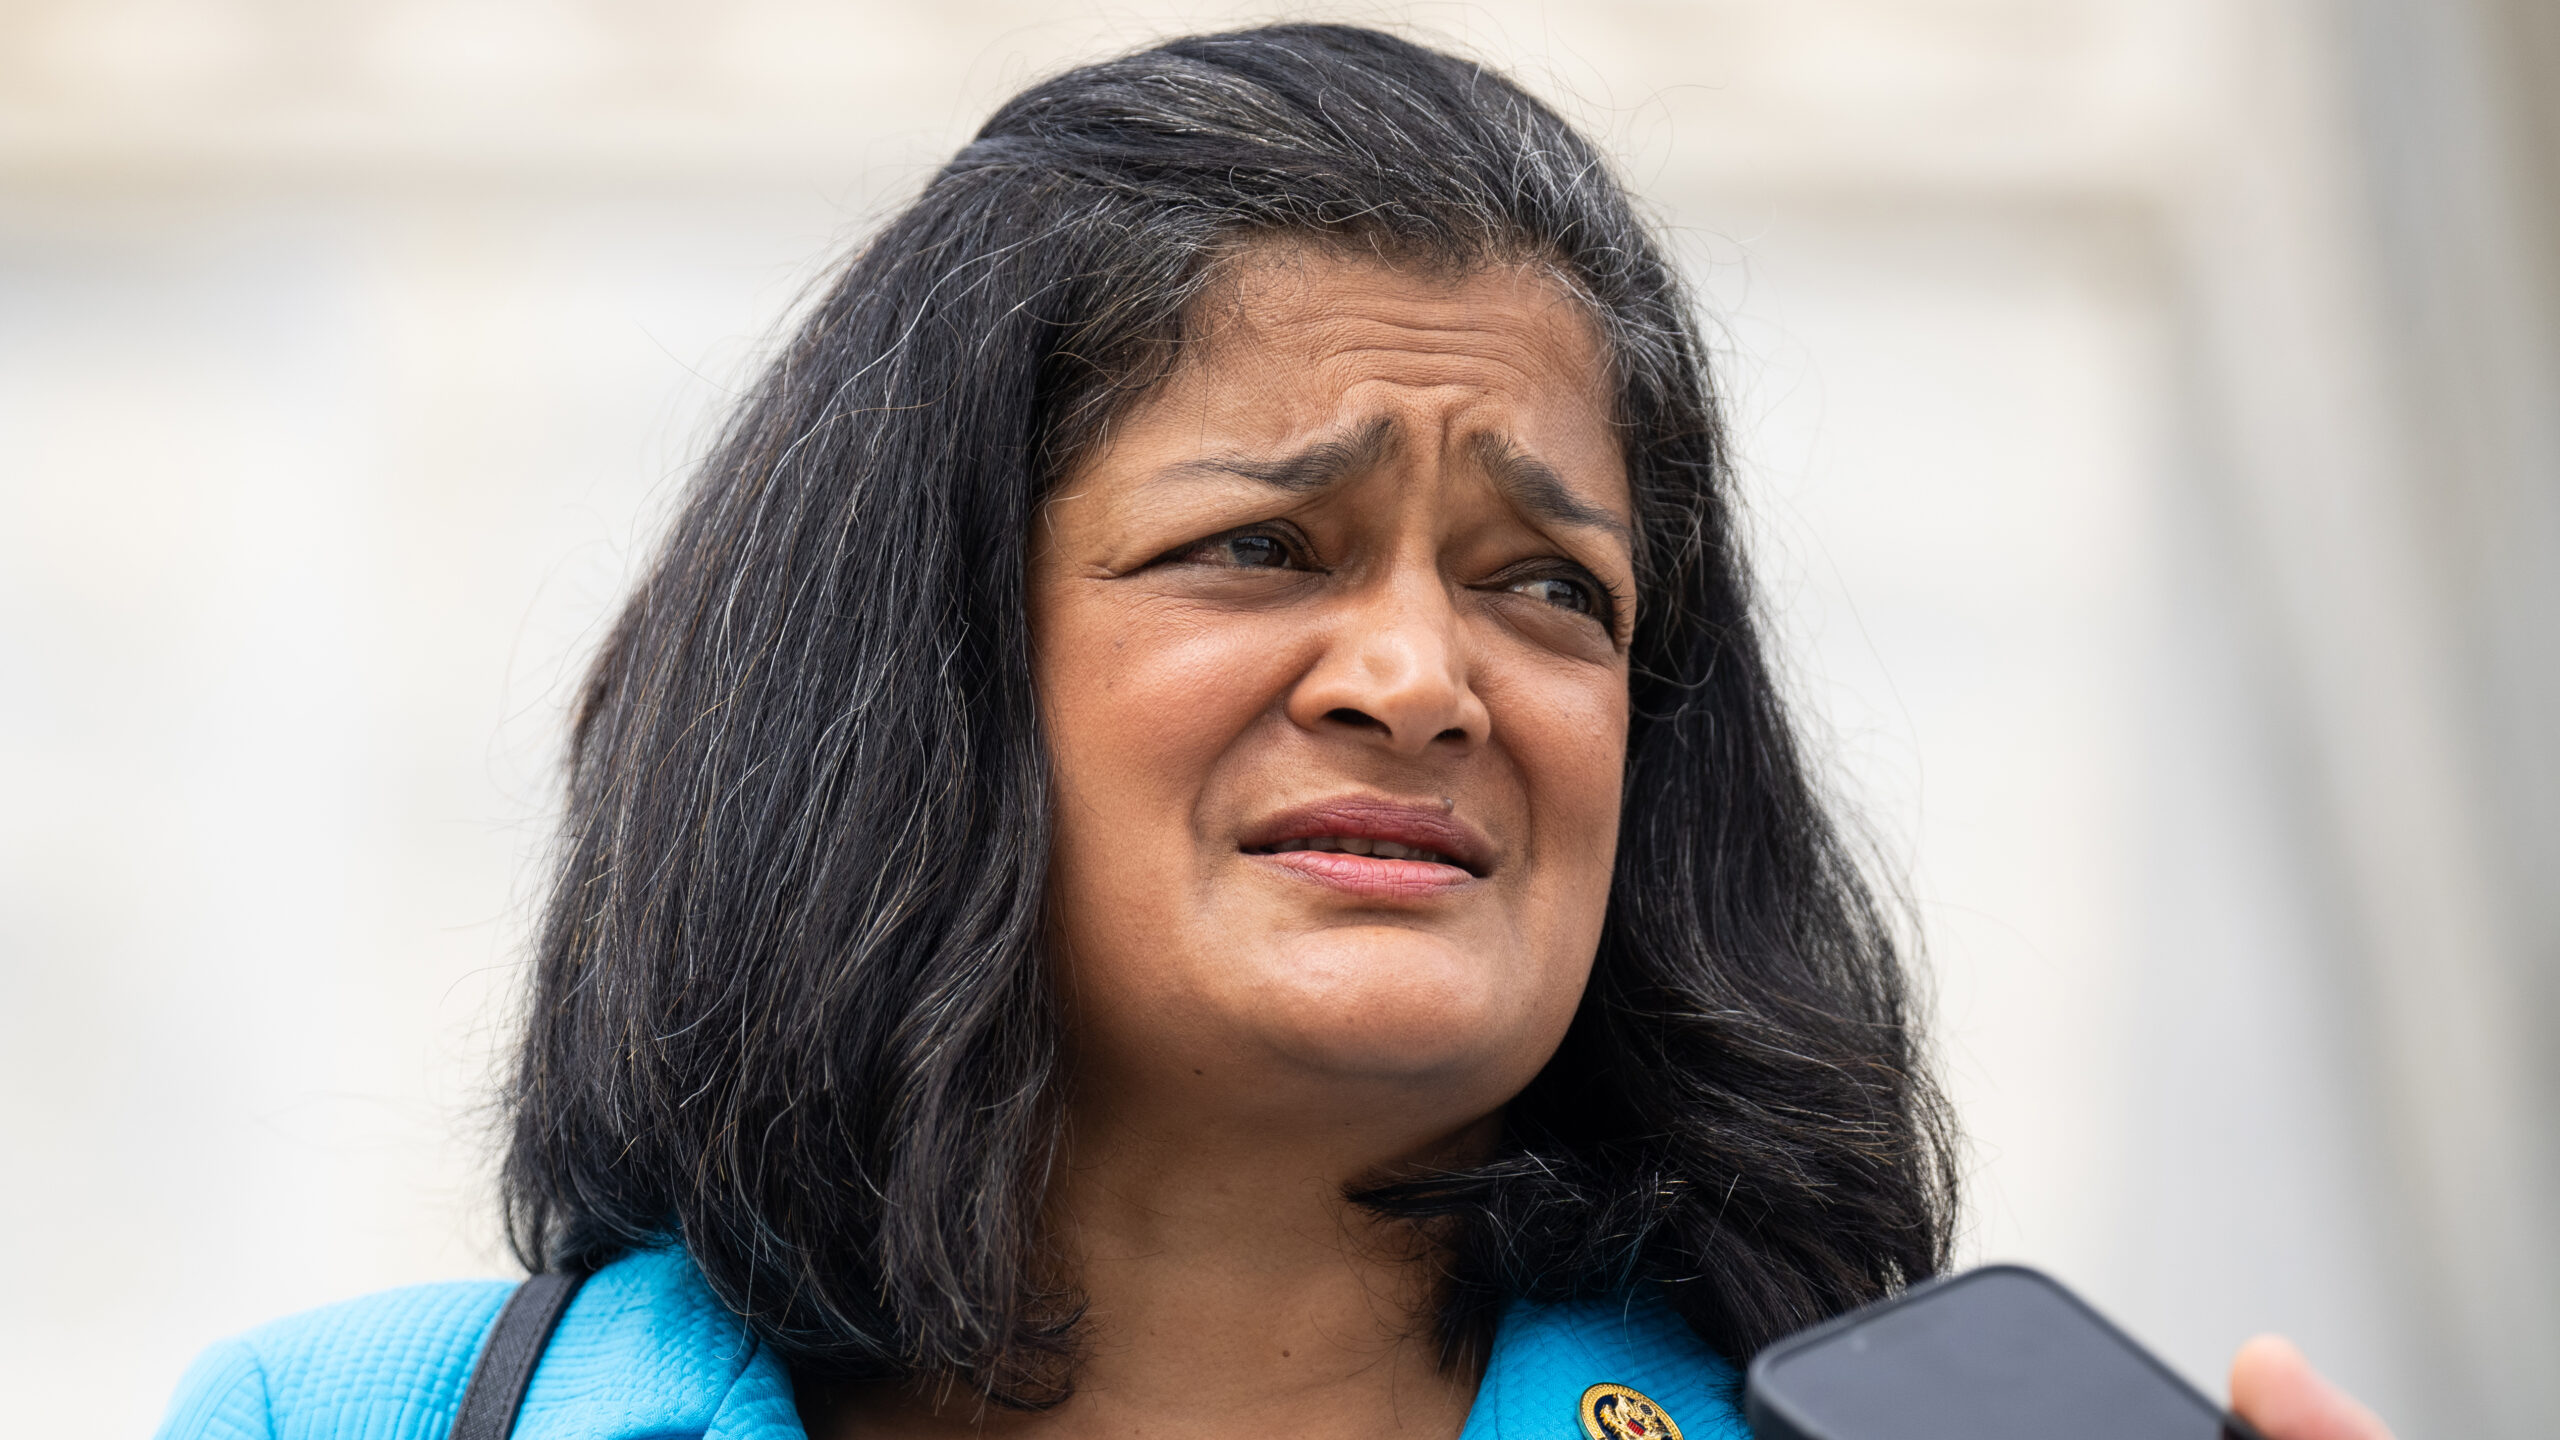 Democrat Pramila Jayapal laughs during discussion of headline about undocumented immigrant raping minor in NYC